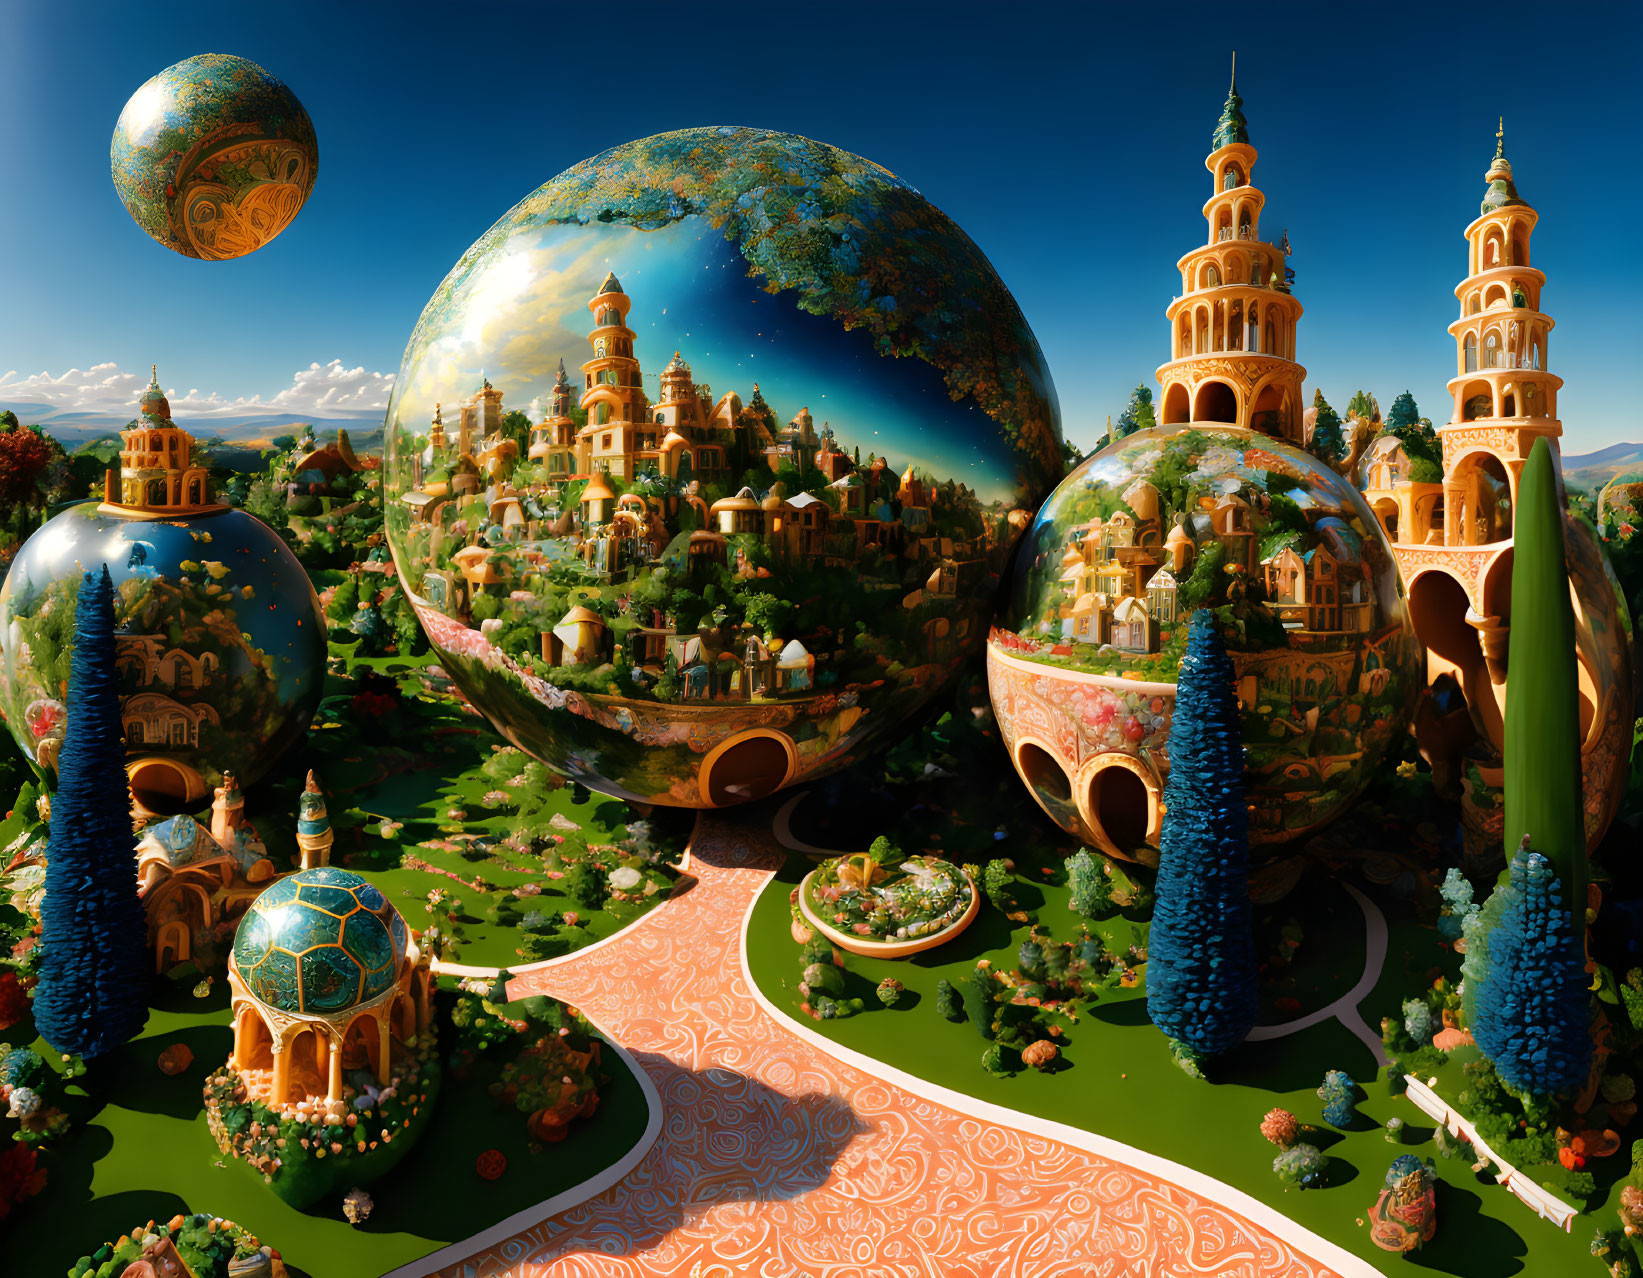 Fantasy landscape with floating orbs, intricate buildings, lush greenery, ornate pathways